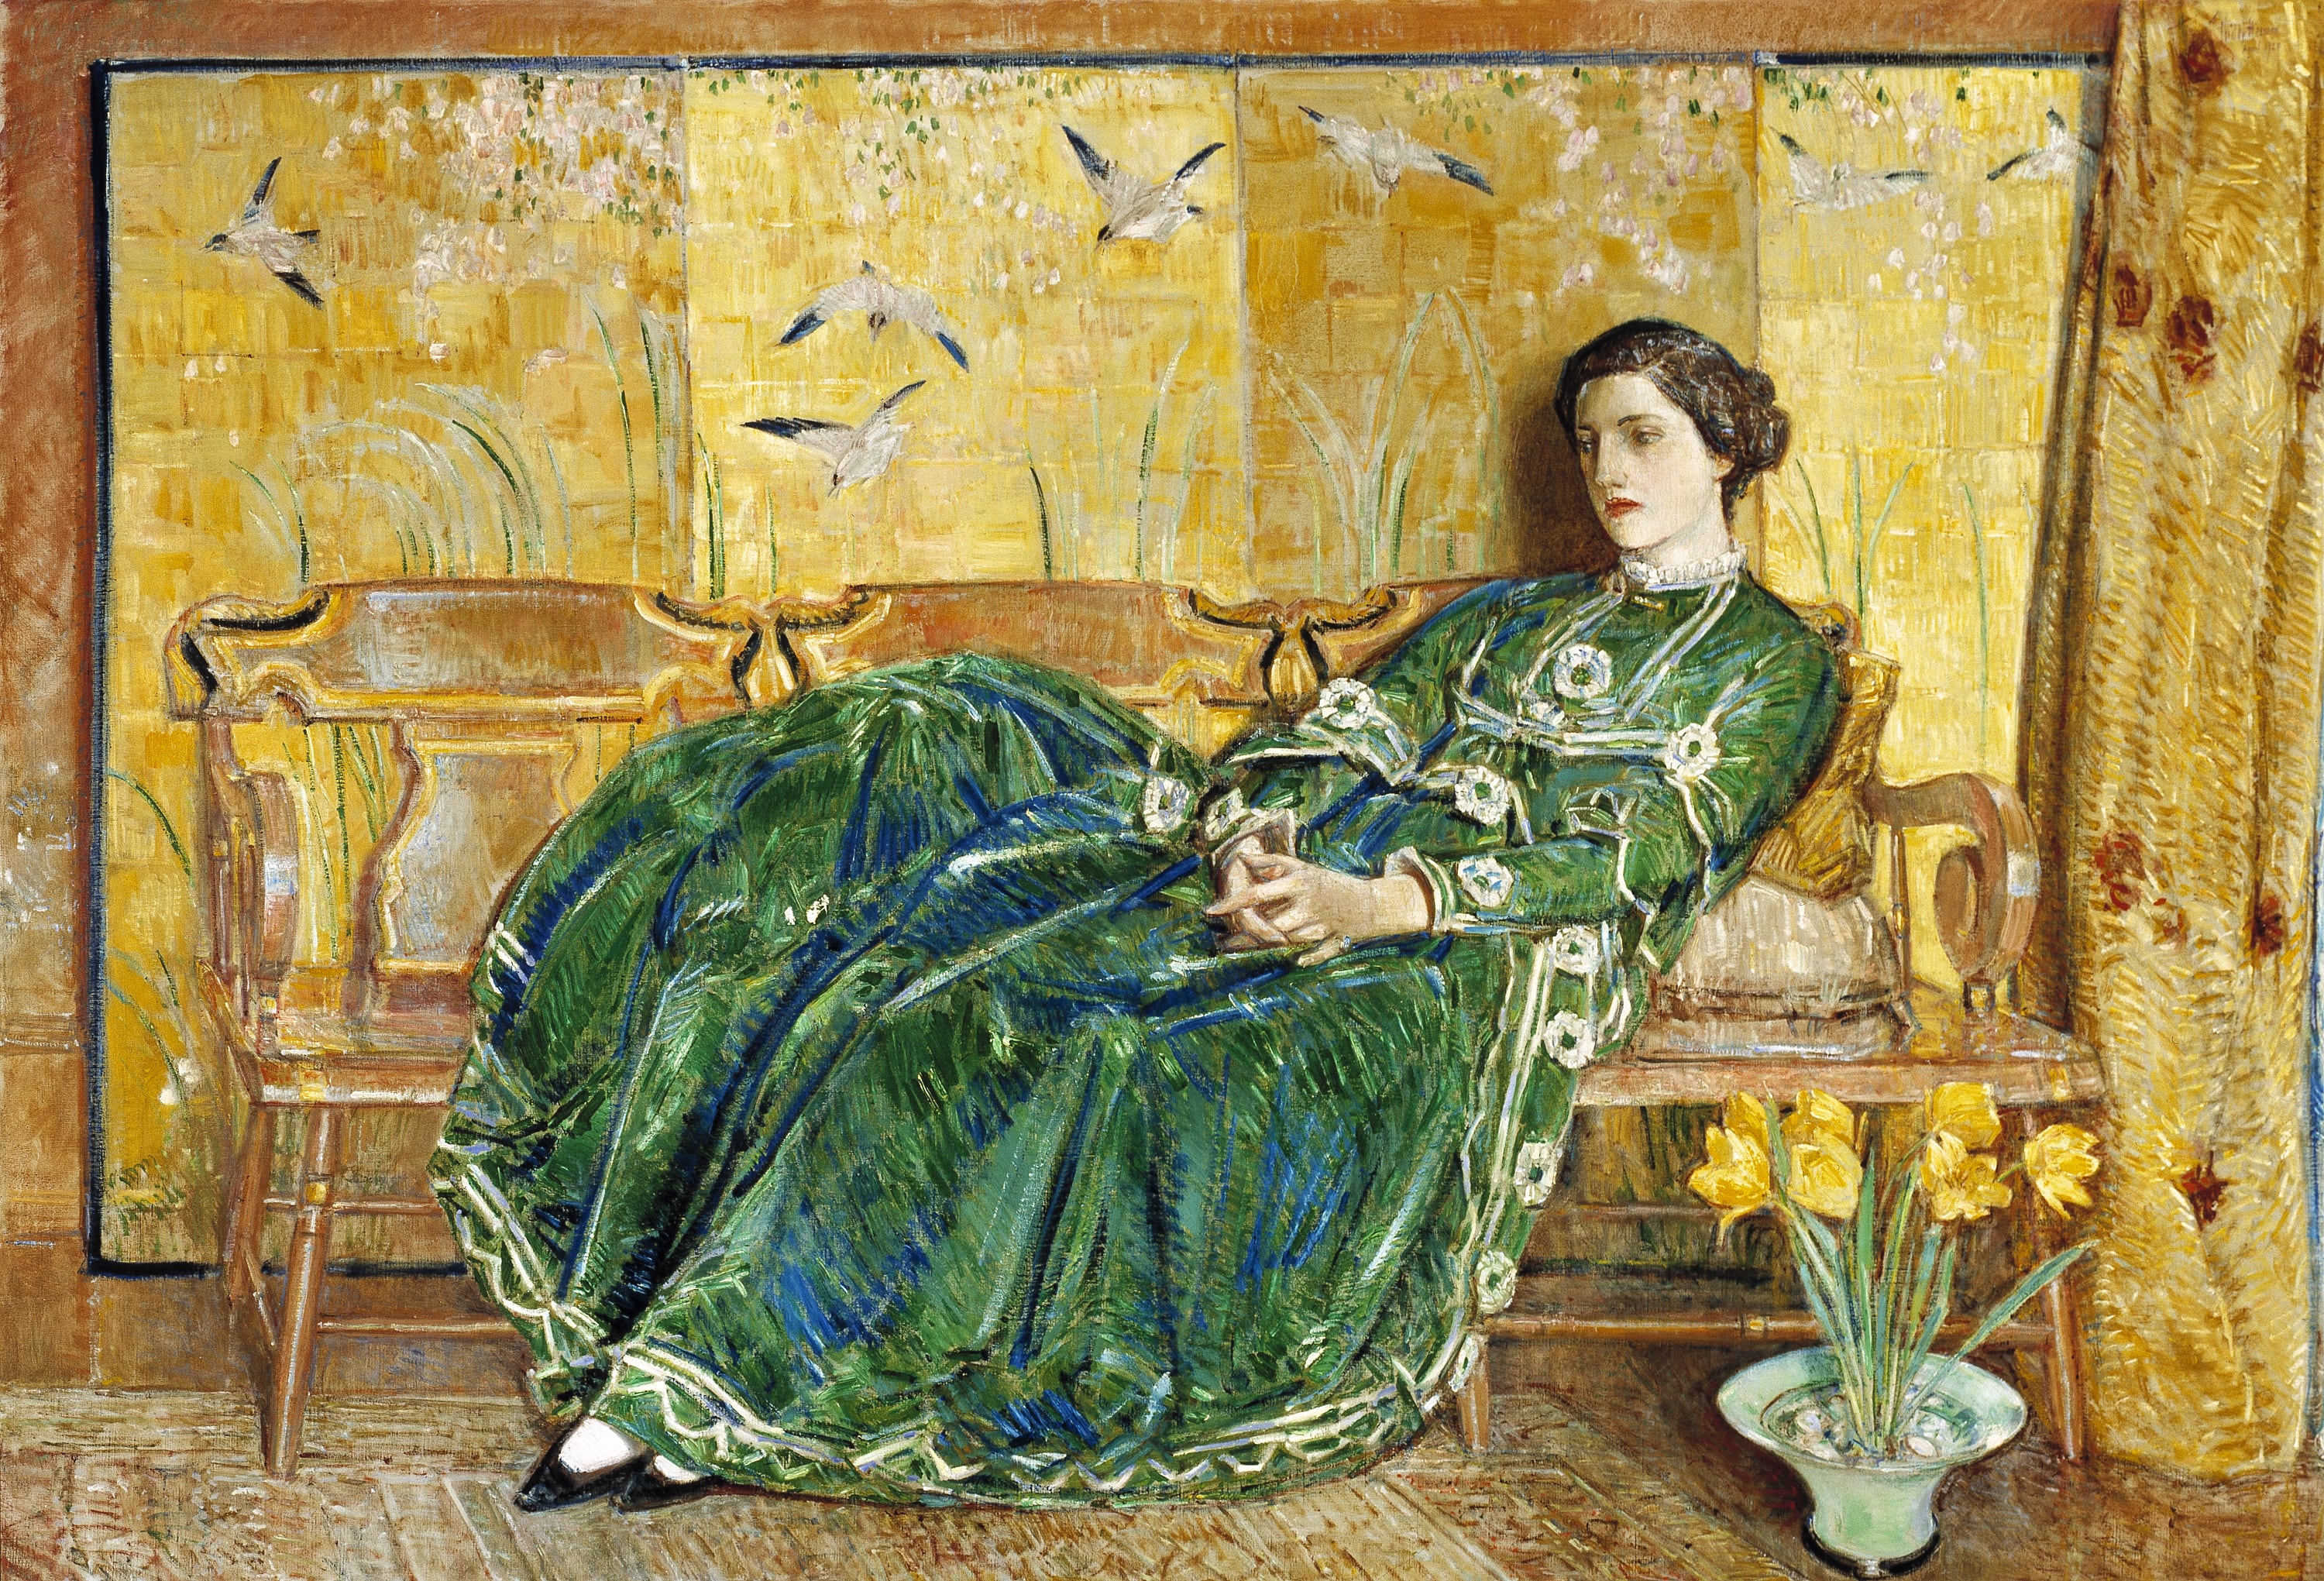 April (The Green Gown), 1920, by Childe Hassam (American, 1859 – 1935)